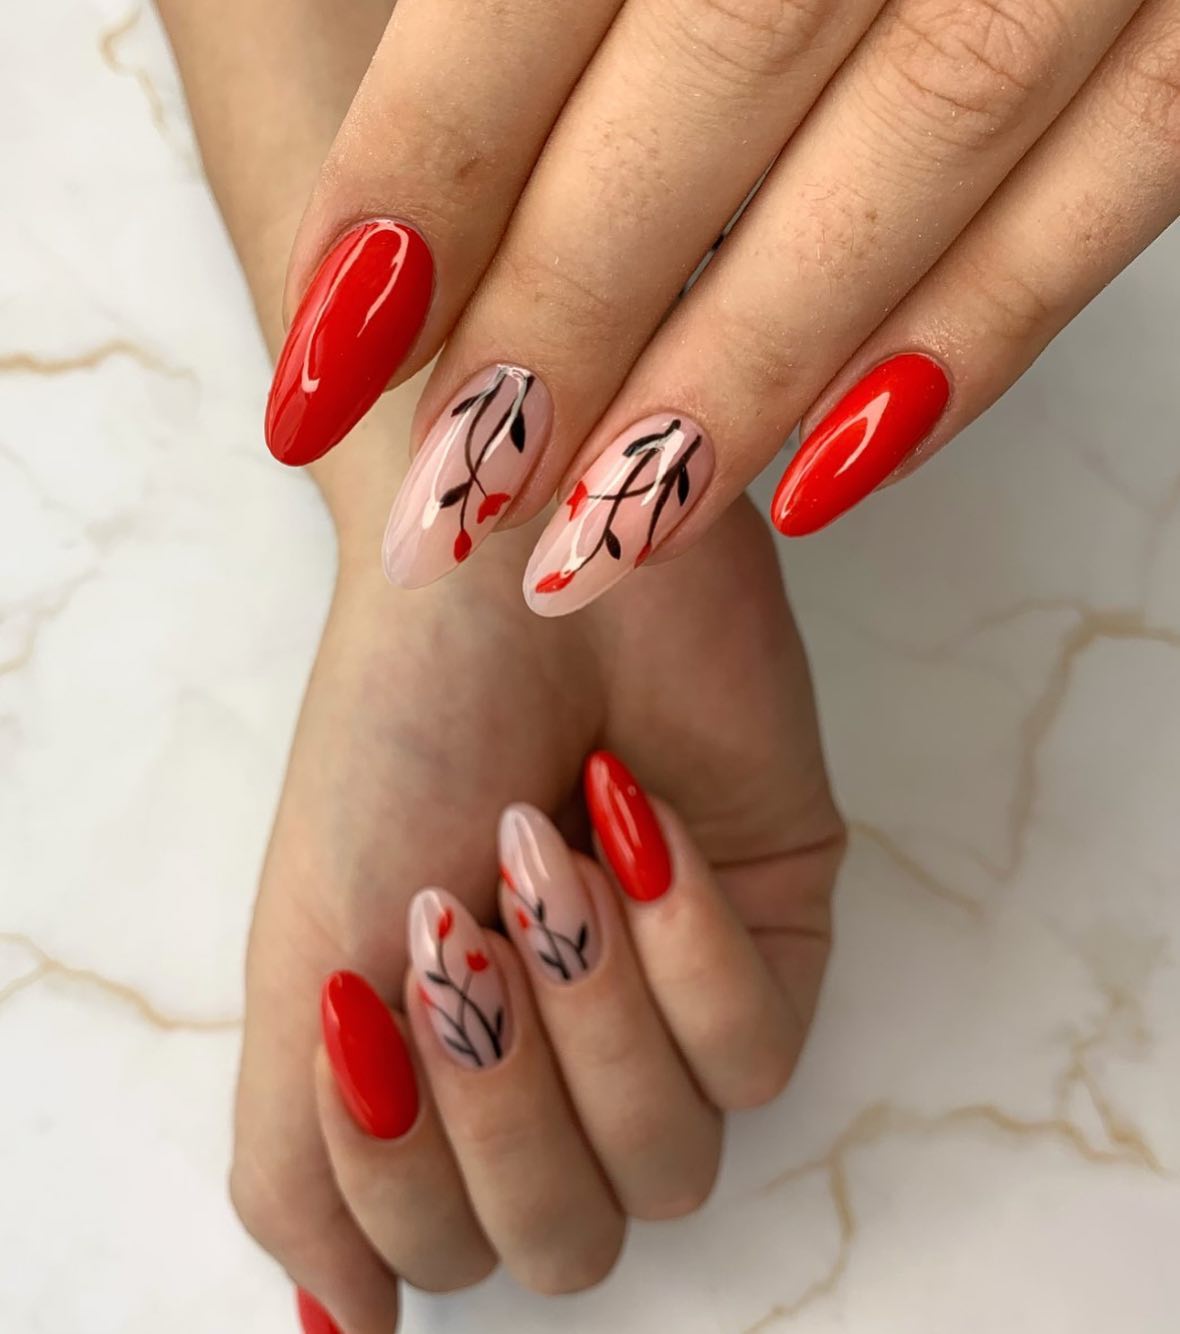 Do you want to add something nice to your nails? You can add some flowers and make your red manicure look awesome.